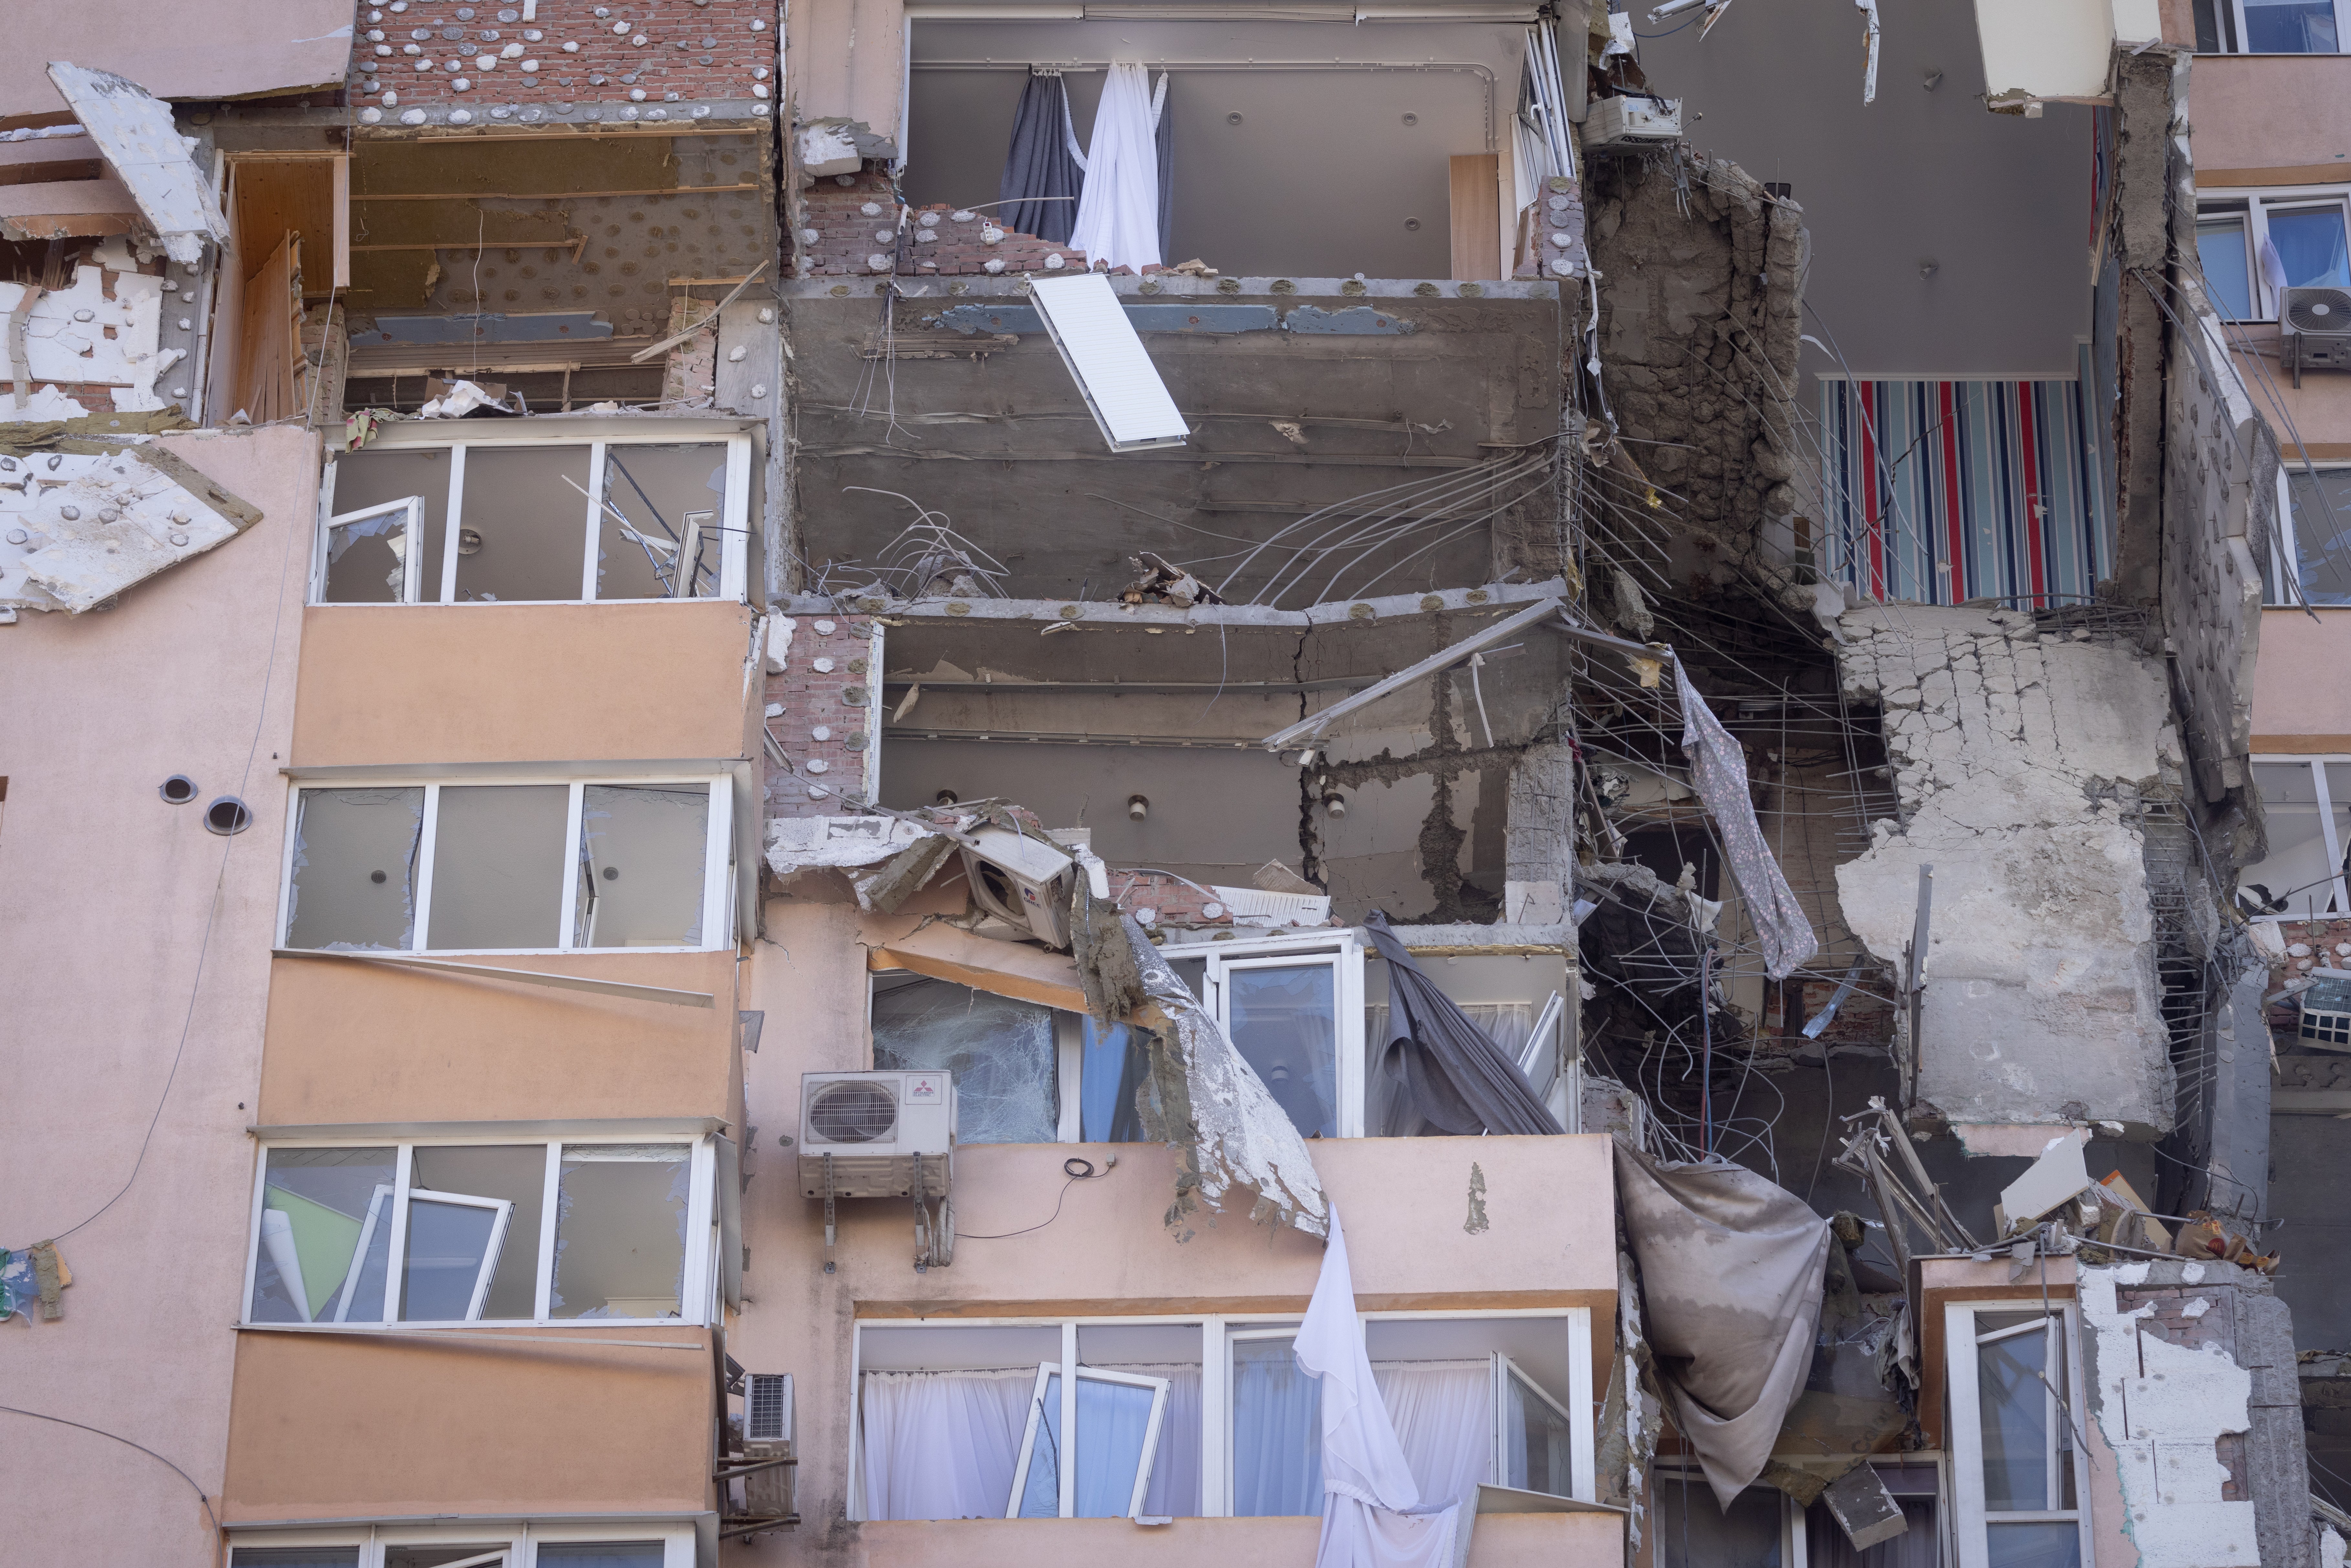 Damage is seen on a large residential tower in Kyiv after it was hit by a missile on 2 February